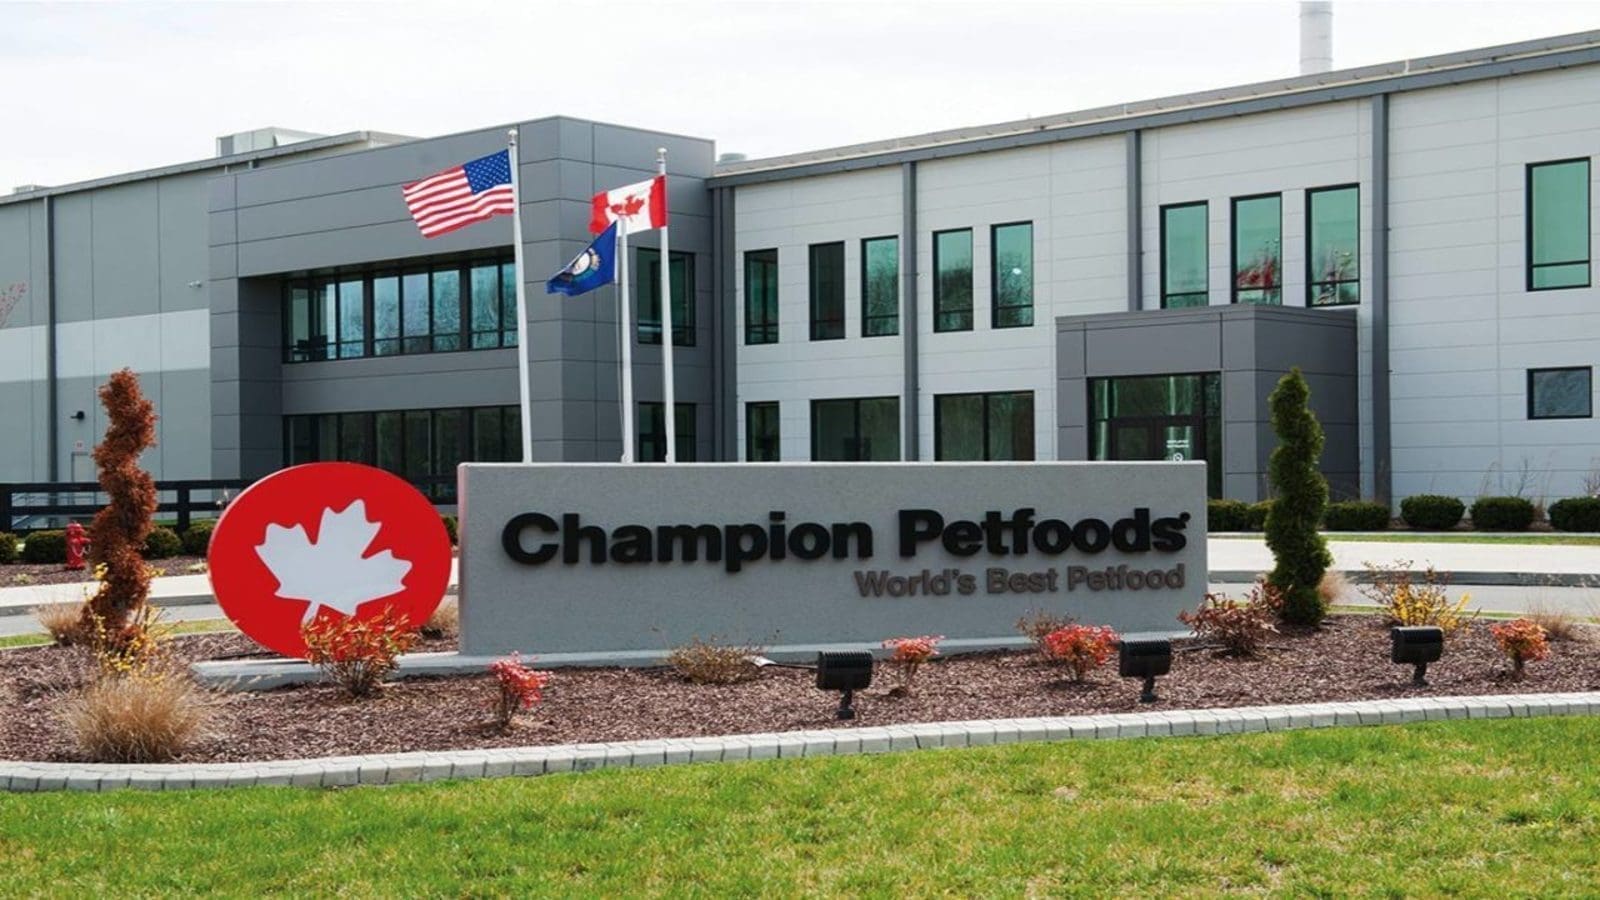 Mars Petcare acquires Champion Petfoods to strengthen capabilities and expand portfolio